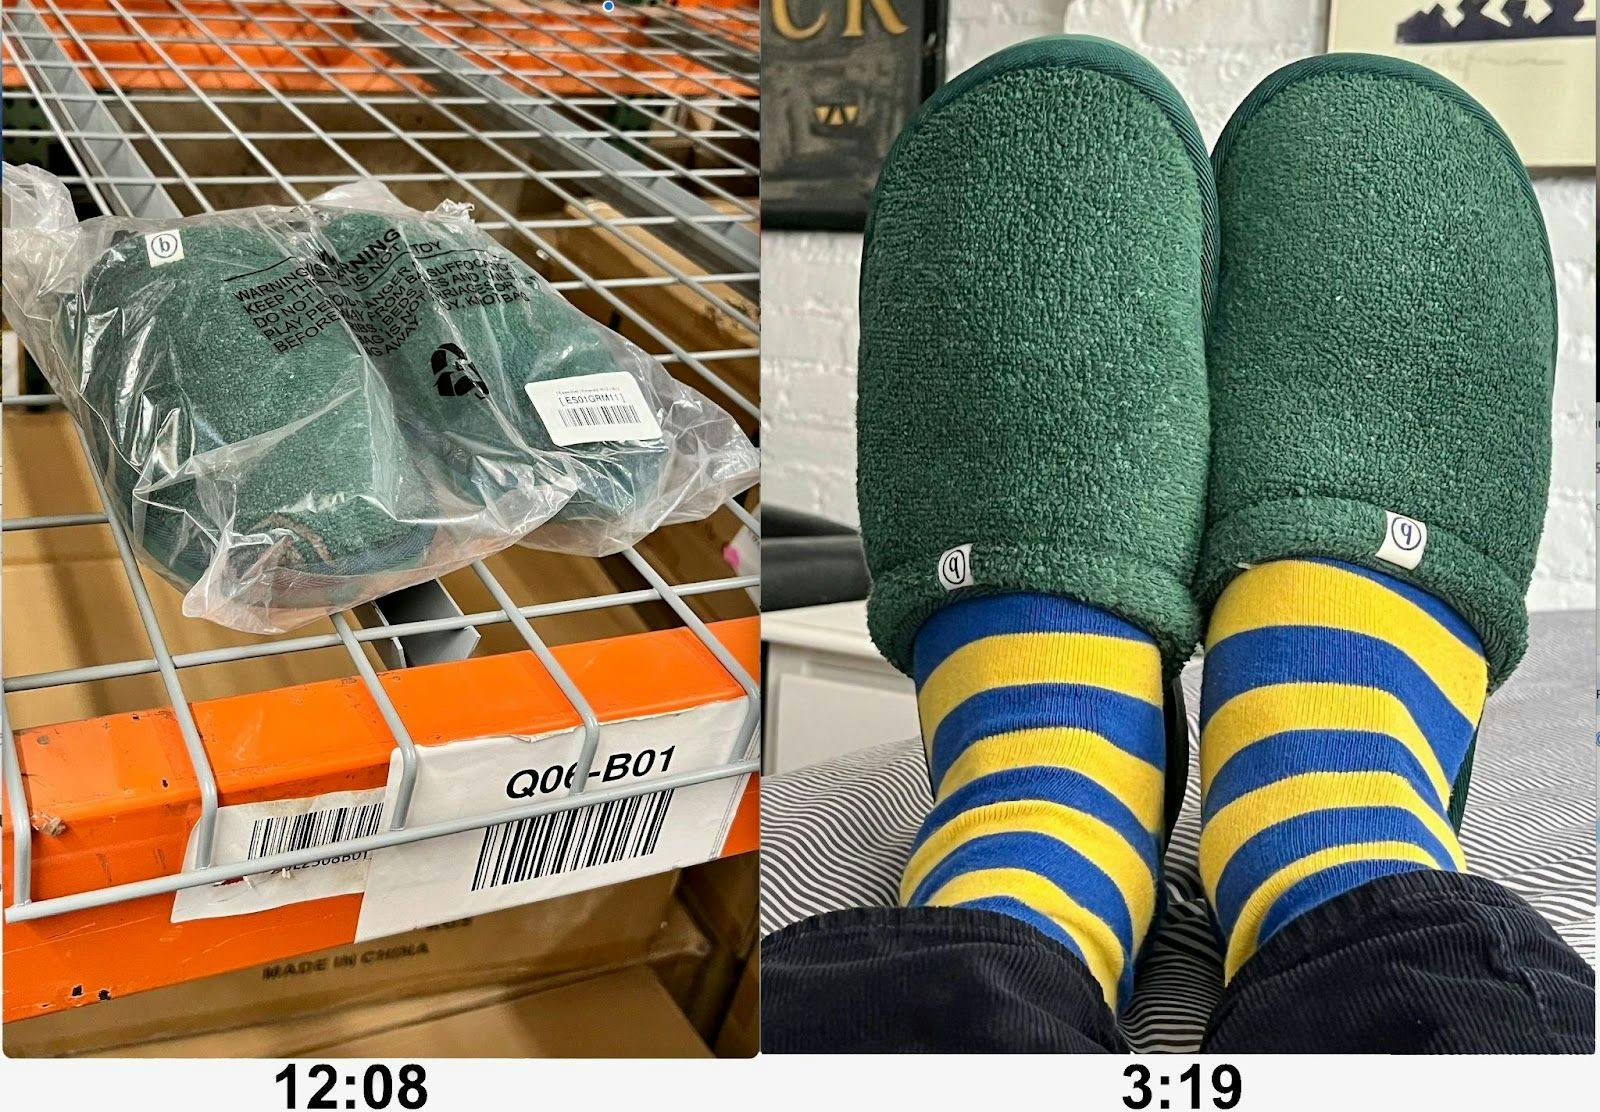 A split-screen image with a pair of slippers on a shelf wrapped in plastic at 12:08 pm and the slippers on the author's feet in his apartment at 3:19 pm. 